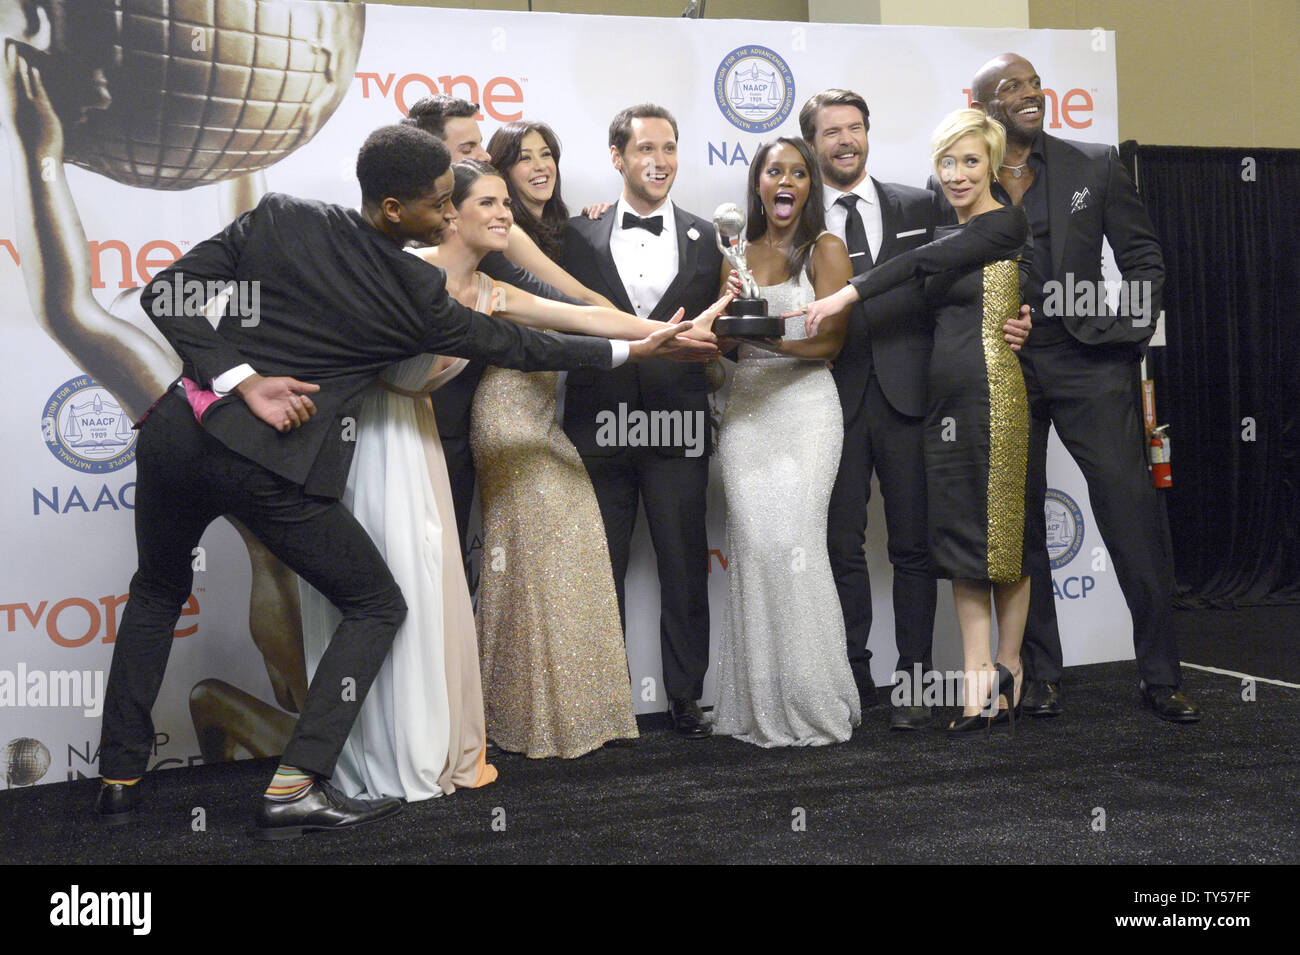 (L-R) Actors Alfred Enoch, Karla Souza, Jack Falahe, Katie Findlay, Matt McGorry, Aja Naomi King, Charlie Weber, Liza Weil and Billy Brown of  'How to Get Away with Murder' pose backstage withe award for Outstanding Drama Series during the 46th NAACP Image Awards at the Pasadena Civic Auditorium in Pasadena, California on February 6, 2015. The NAACP Image Awards celebrates the accomplishments of people of color in the fields of television, music, literature and film and also honors individuals or groups who promote social justice through creative endeavors.  Photo by Phil McCarten/UPI Stock Photo